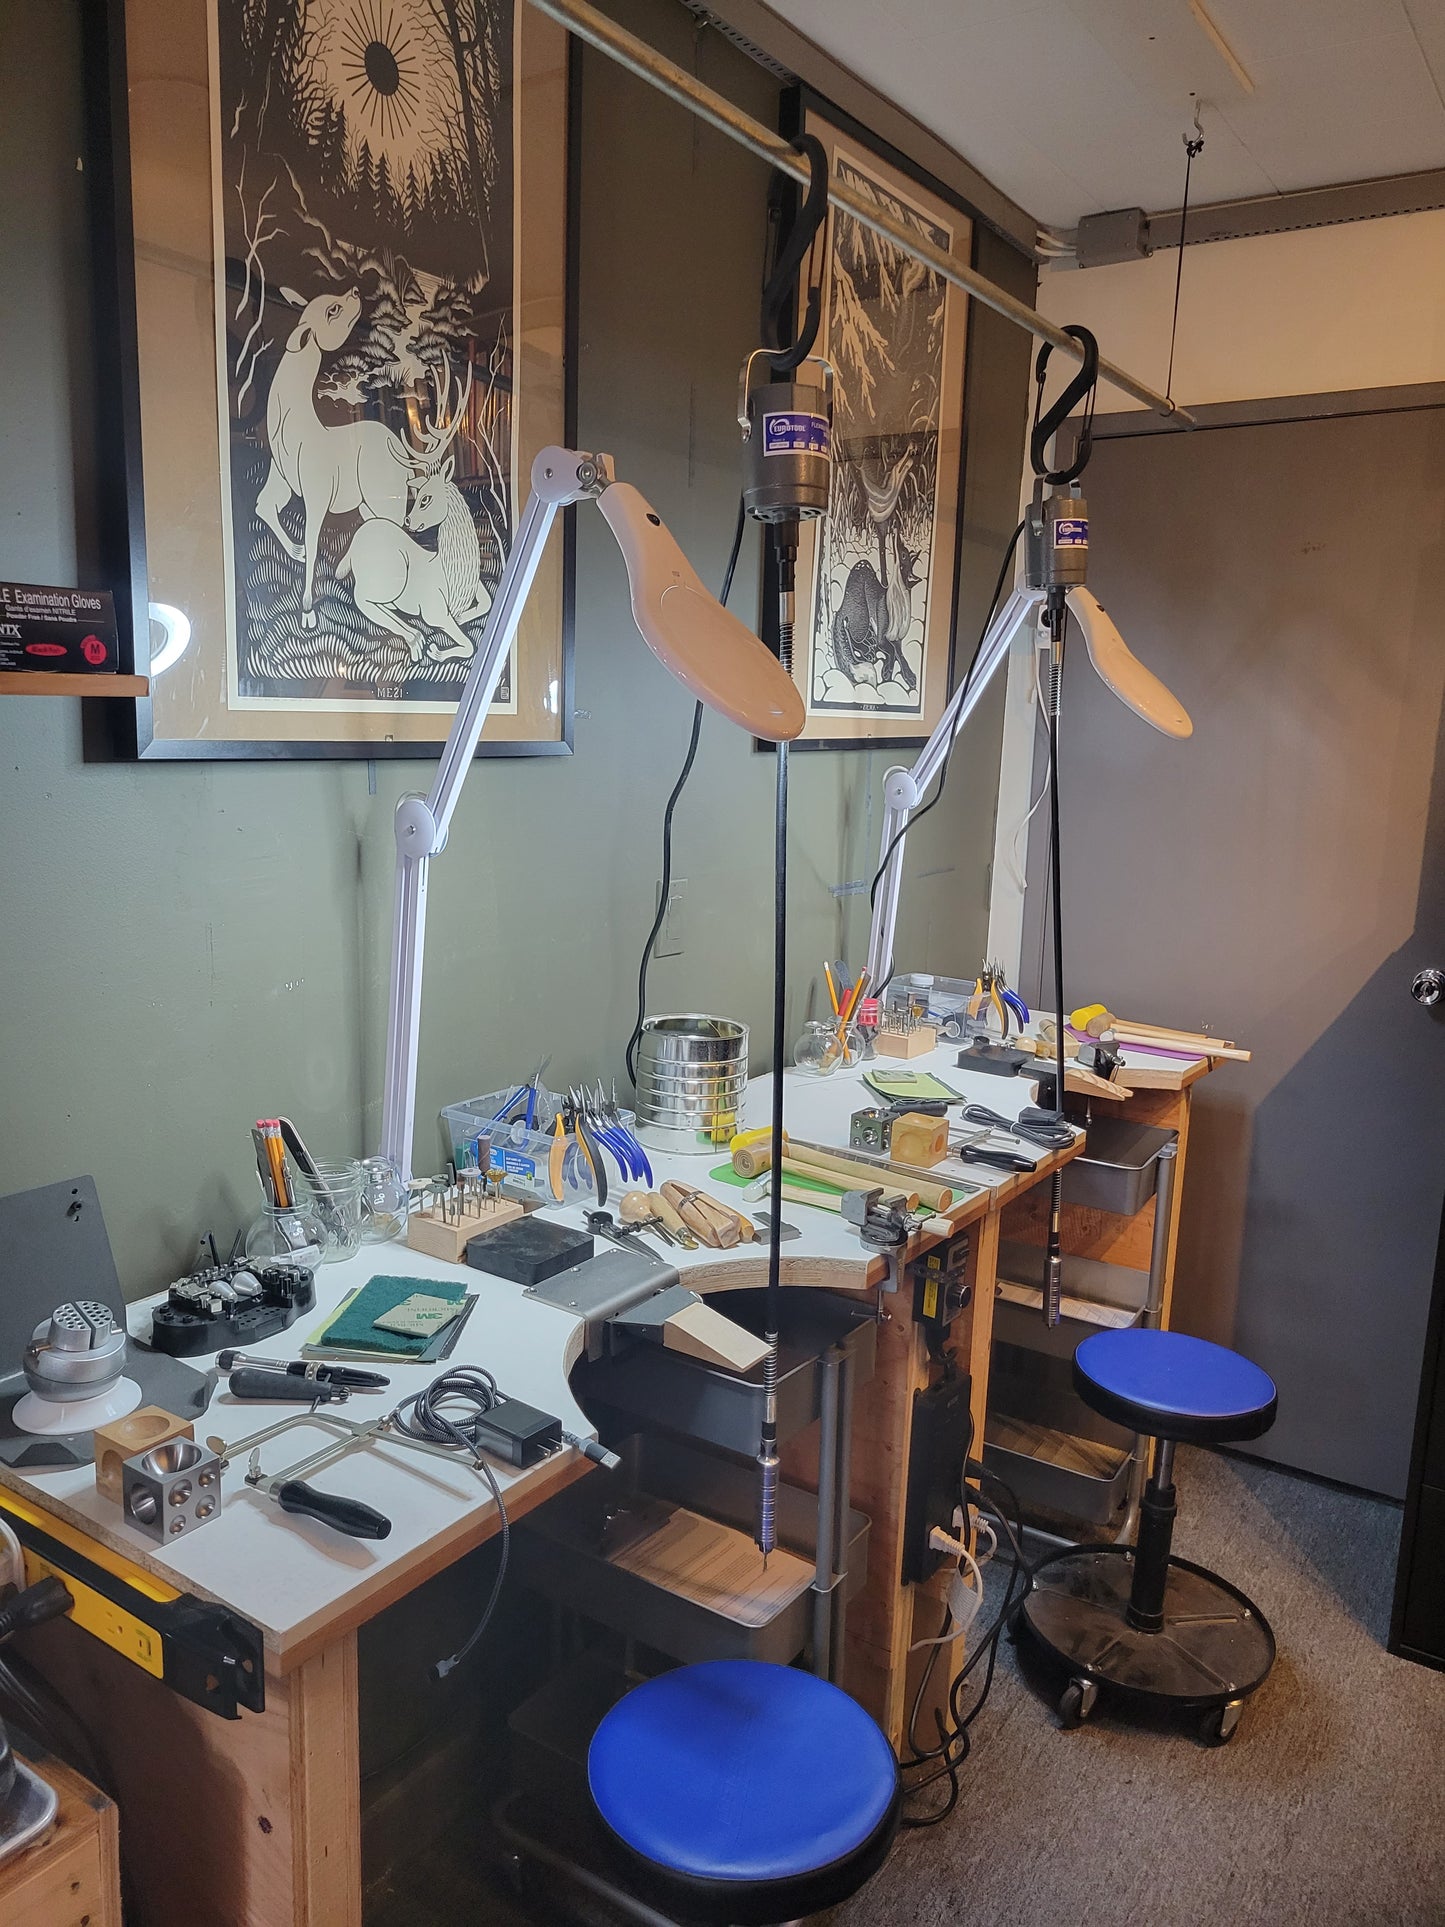 IN STUDIO Private Double Desk Silversmith lessons for Couples & Friends & Family 🏳️‍🌈 asl 🤟 ♿️ ♾️